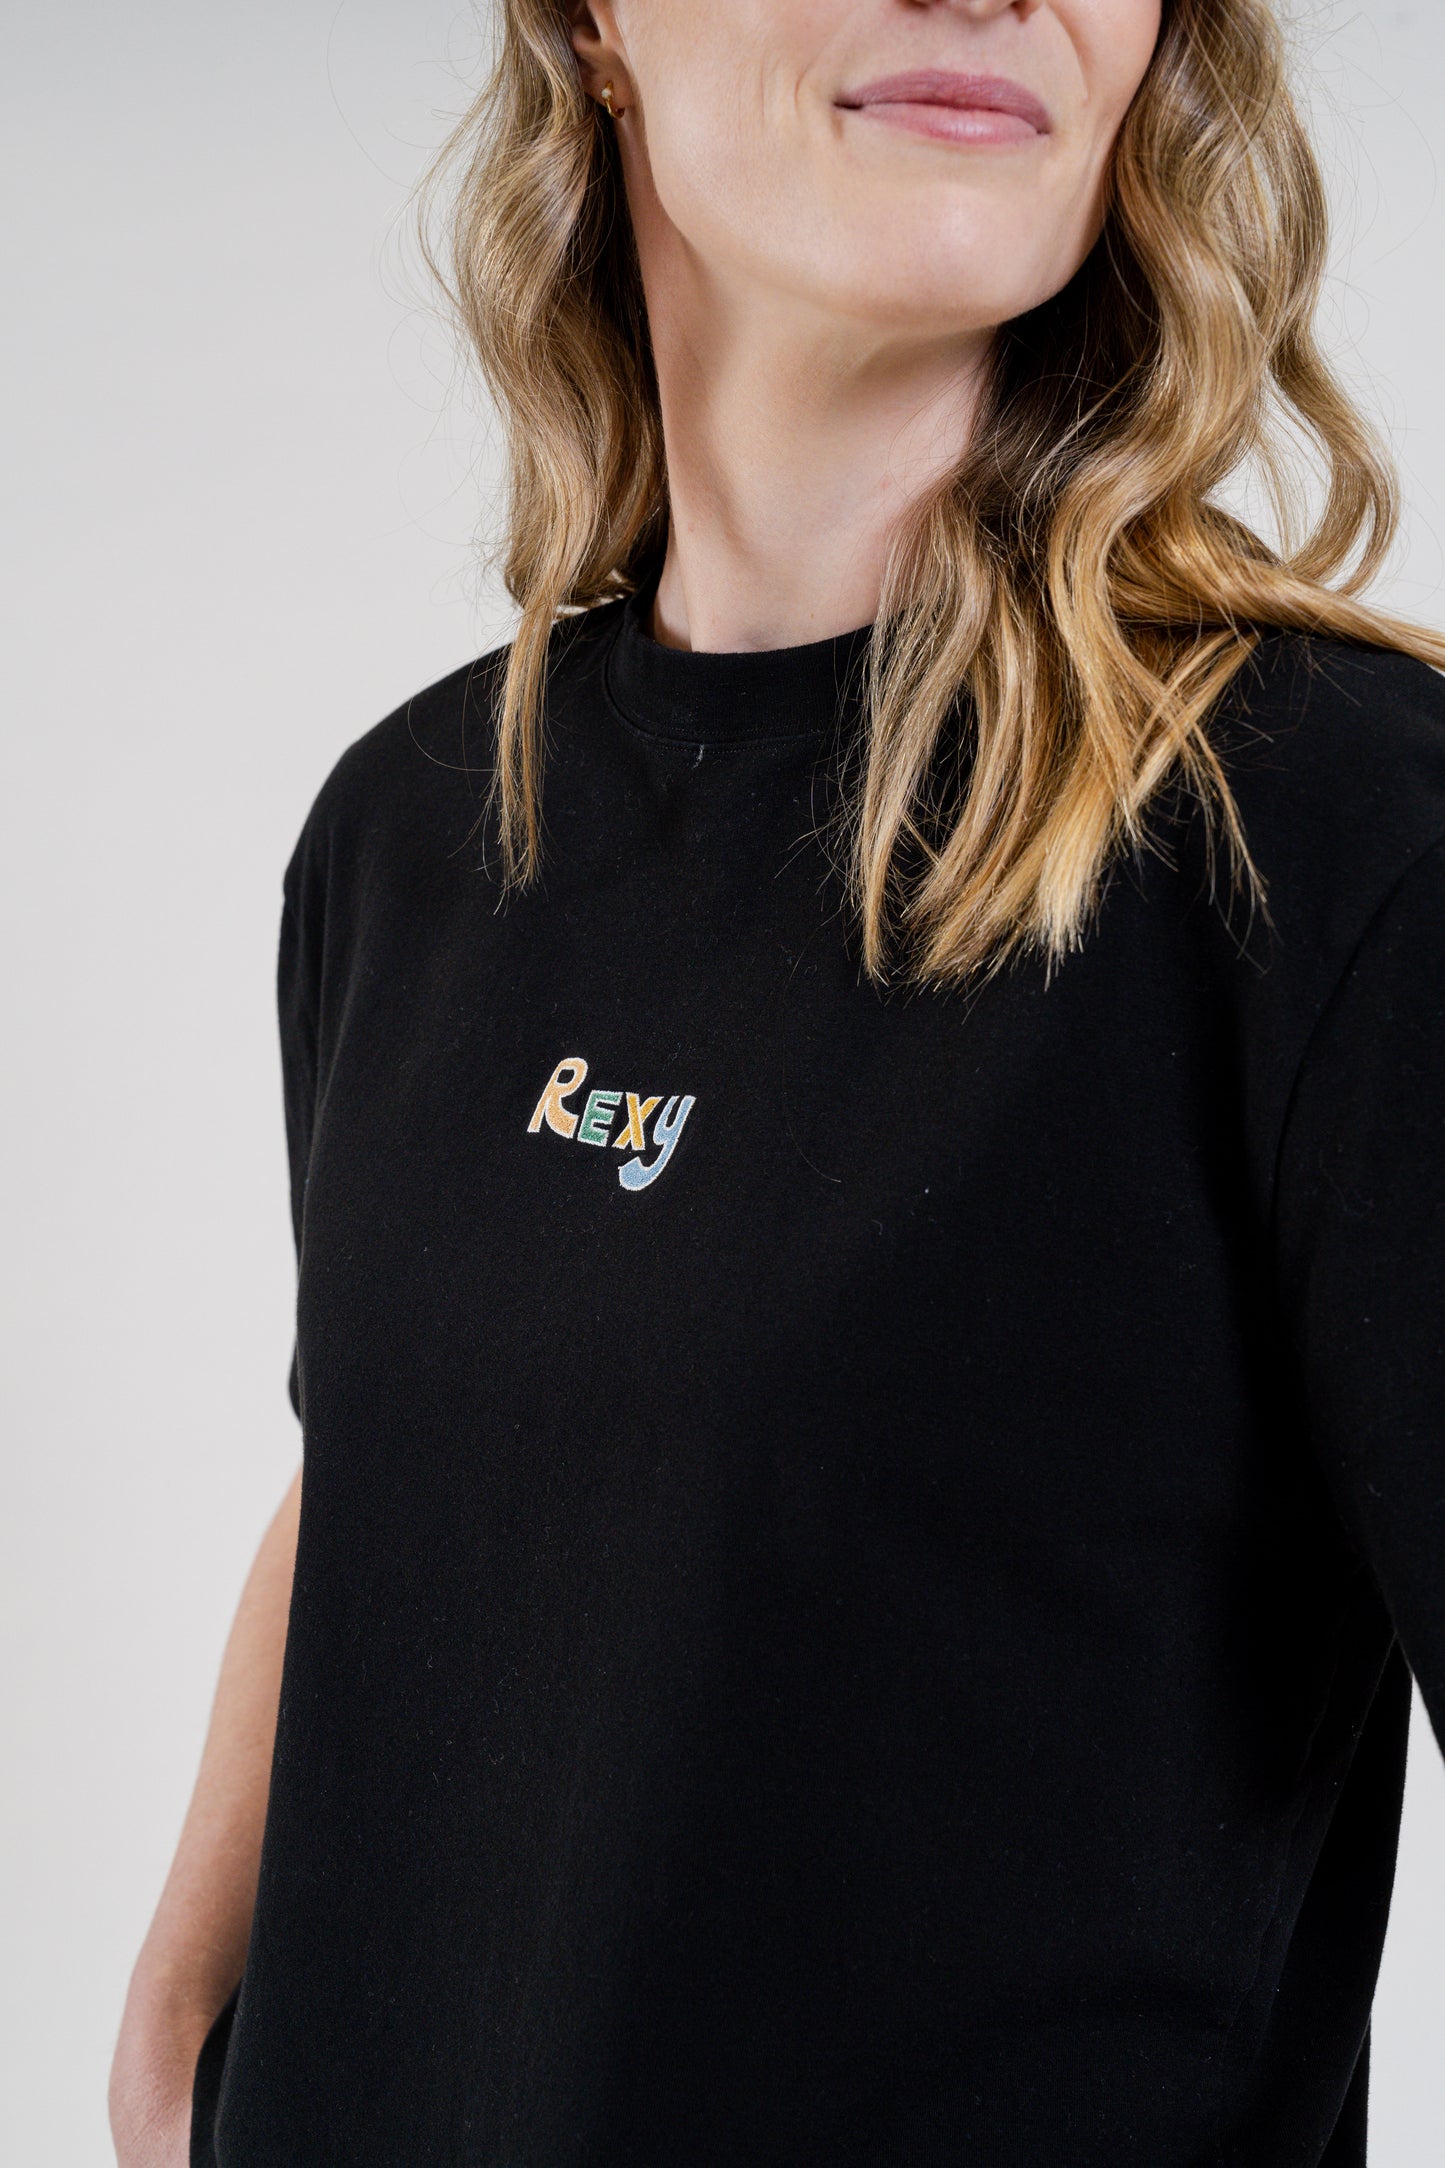 Rexy Staple Black Tee - Scooter Rexy (Adult)